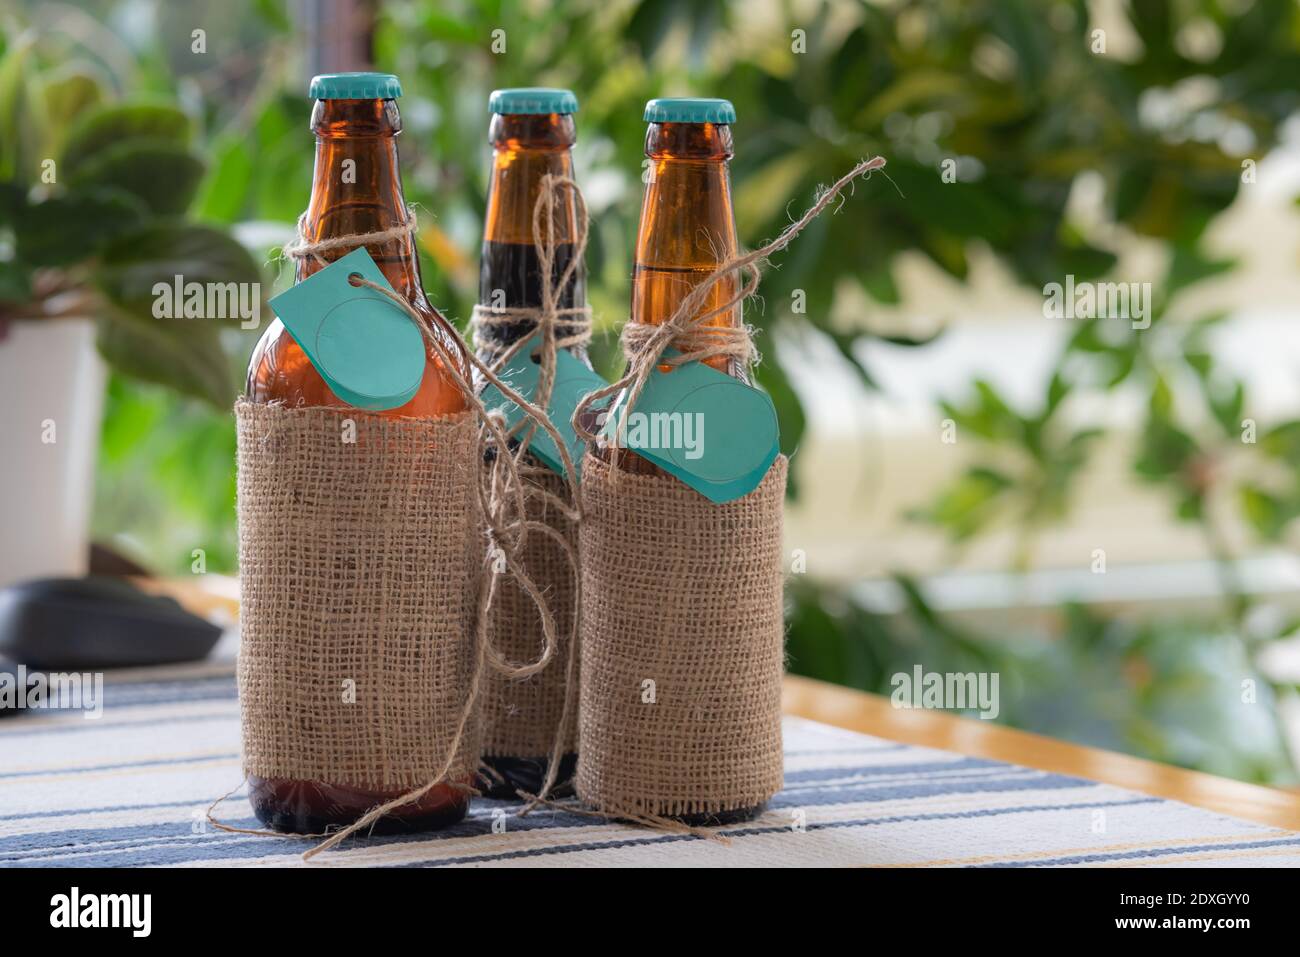 A bottle of delicious-looking craft beer on a table, waiting to be consumed. Stock Photo